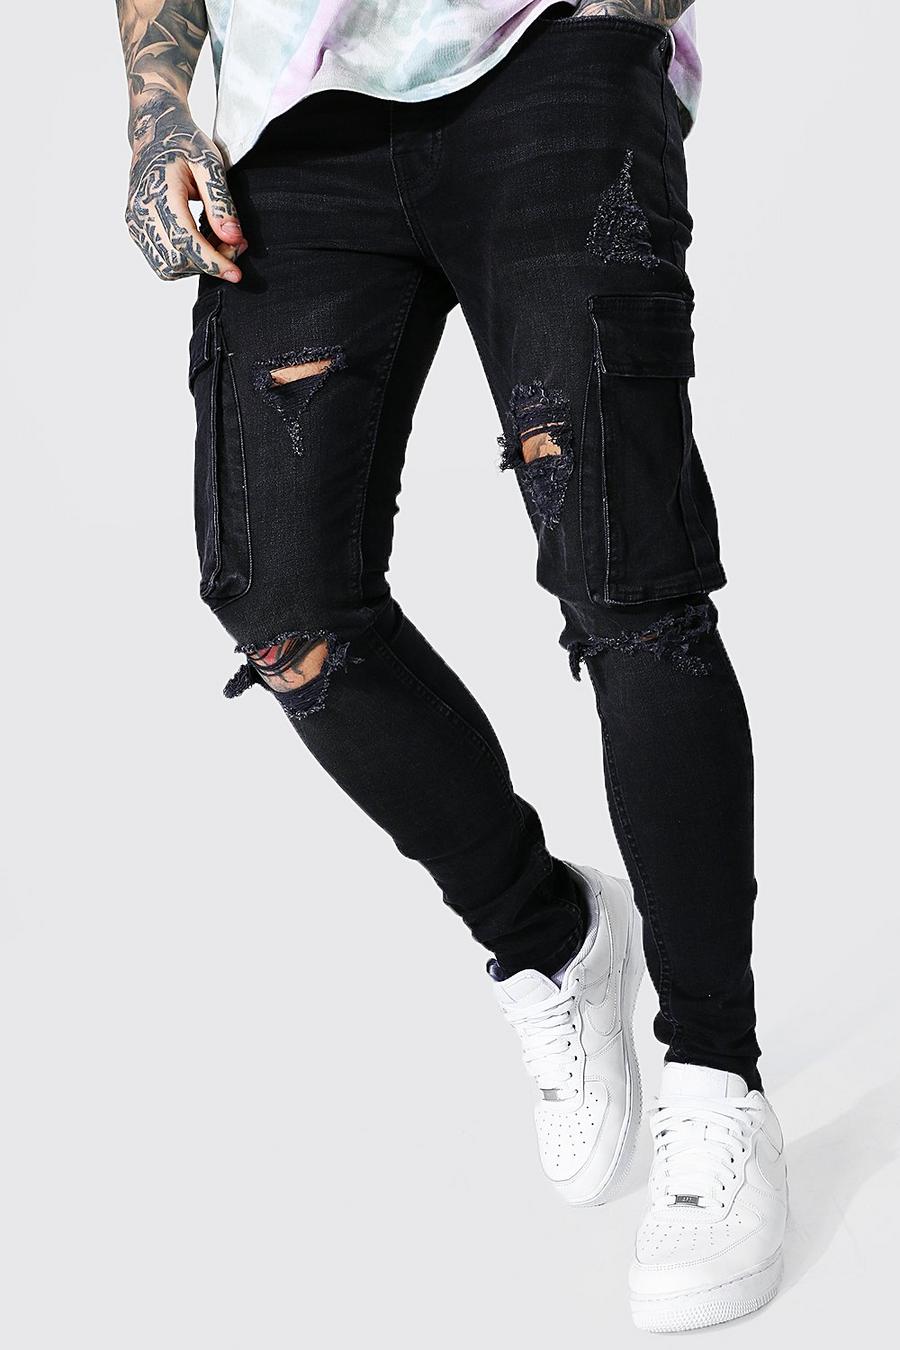 Womens Mens Clothing Mens Jeans Skinny jeans Black Boohoo Denim Super Skinny Cargo Jean With Knee Rips in Washed Black 